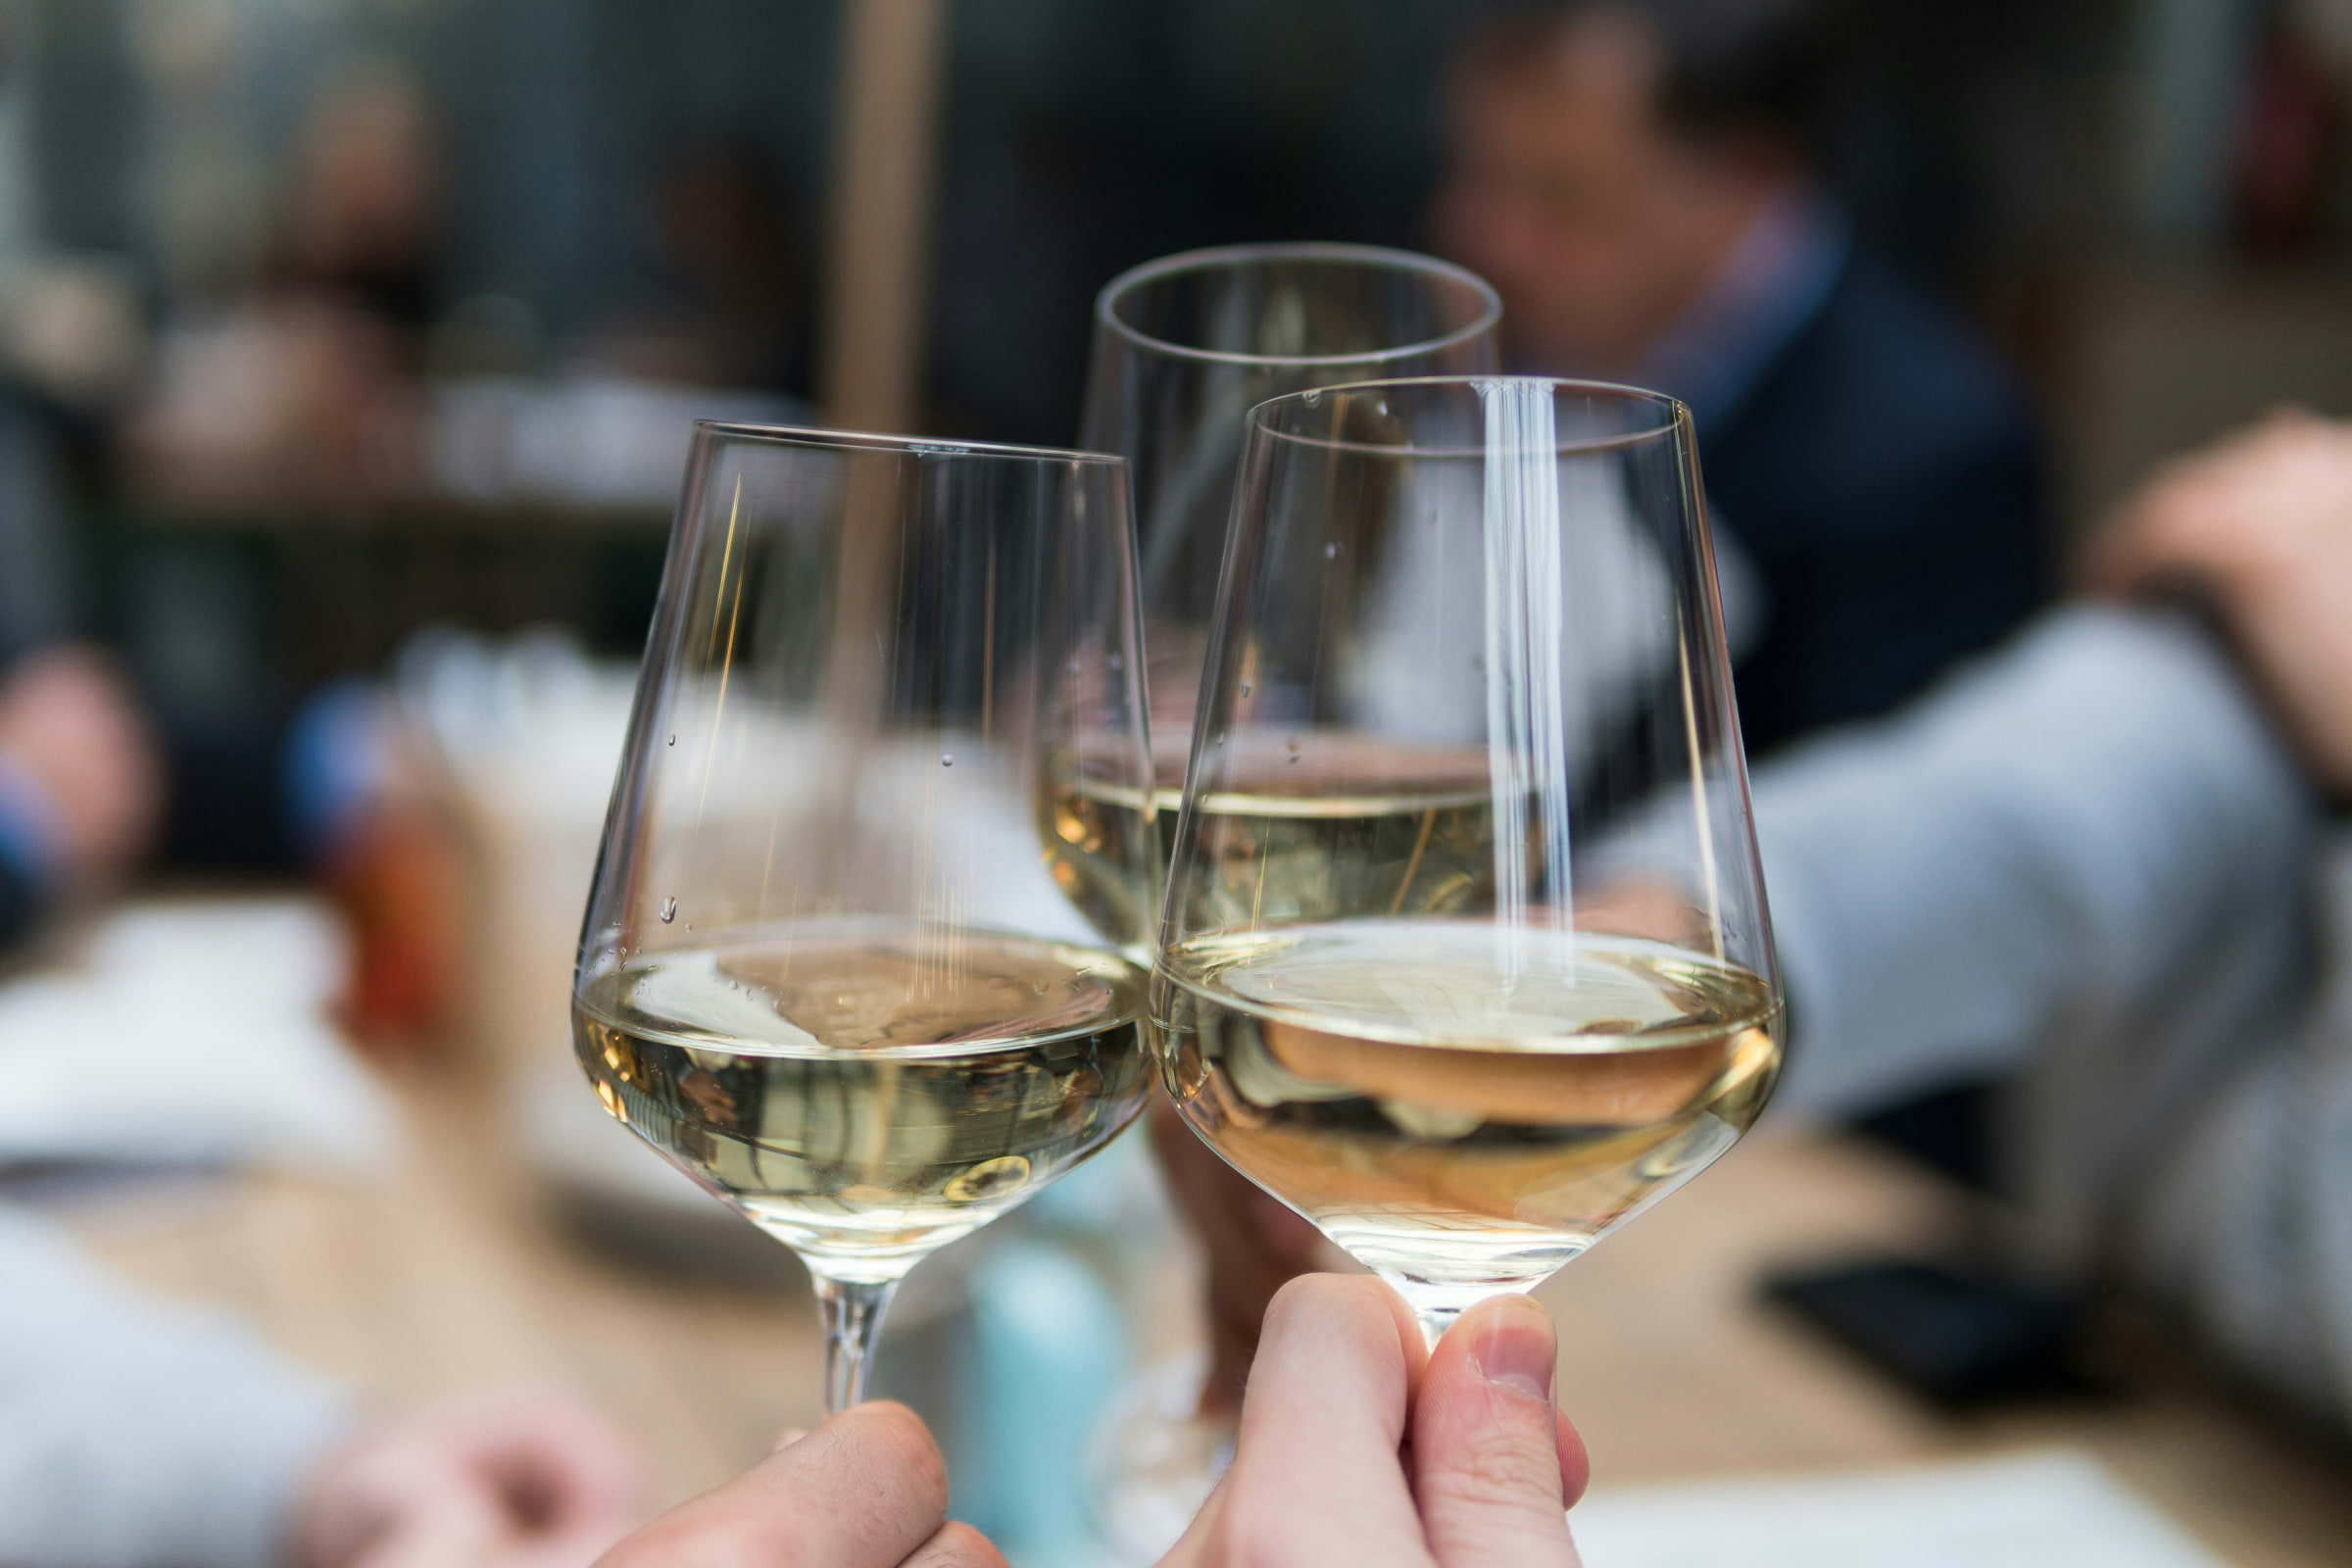 Celebrate International Women's Day at this Women in Wine Tasting event